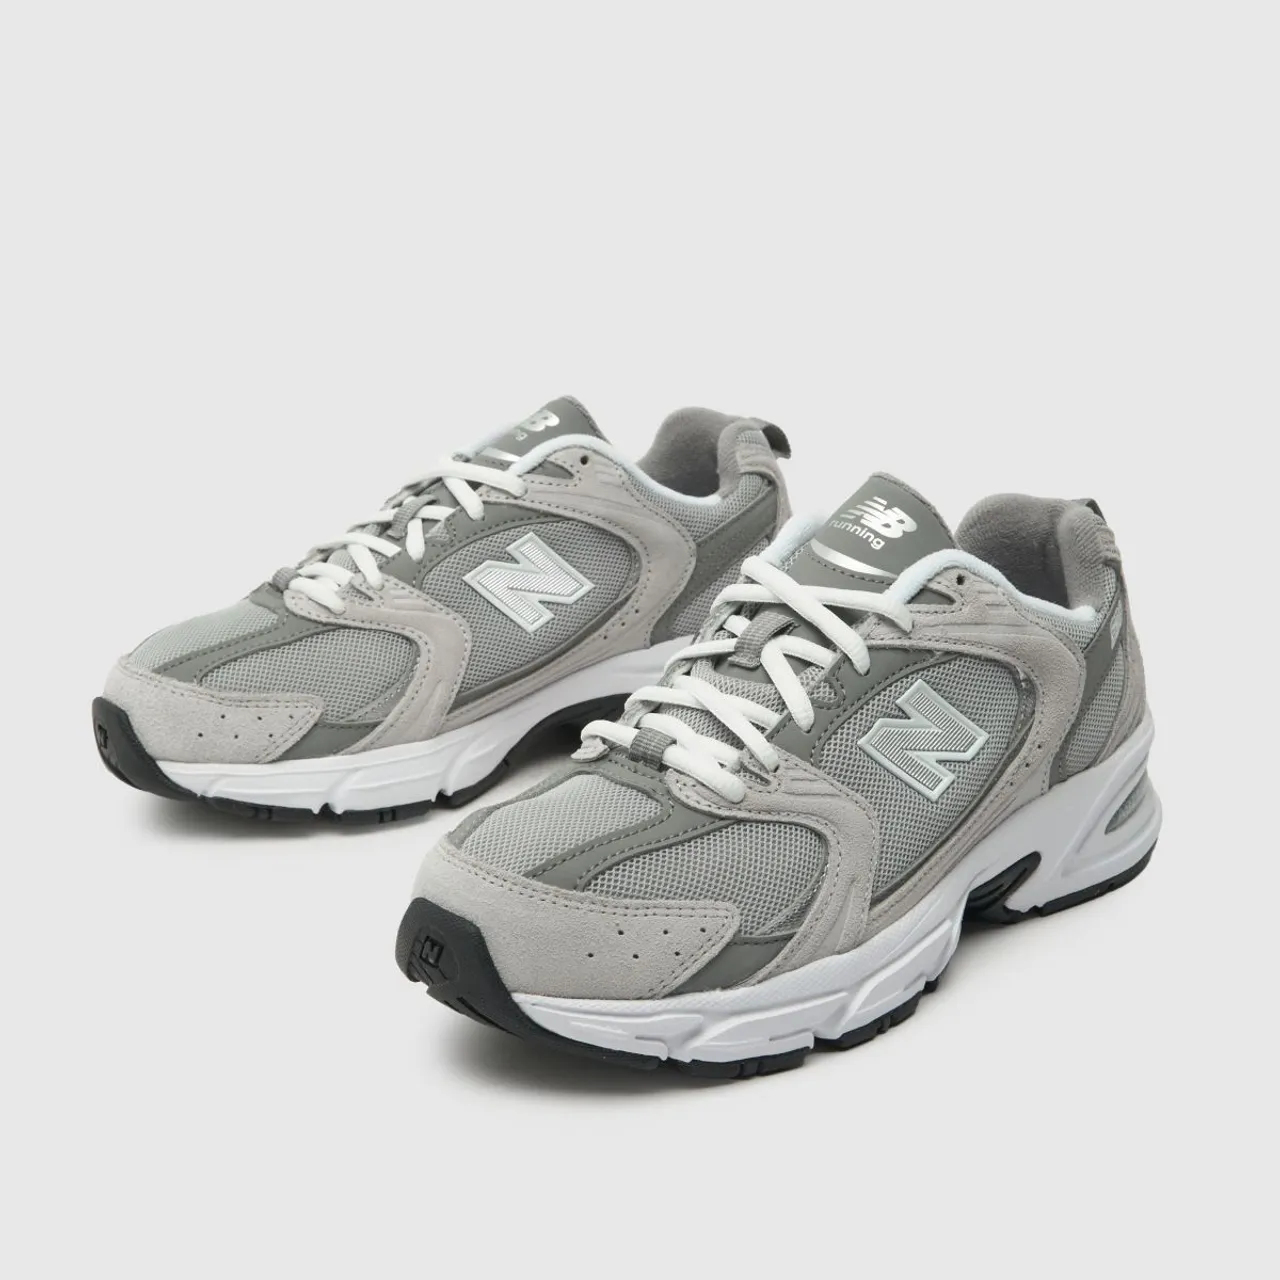 New Balance 530 Trainers in Grey Multi